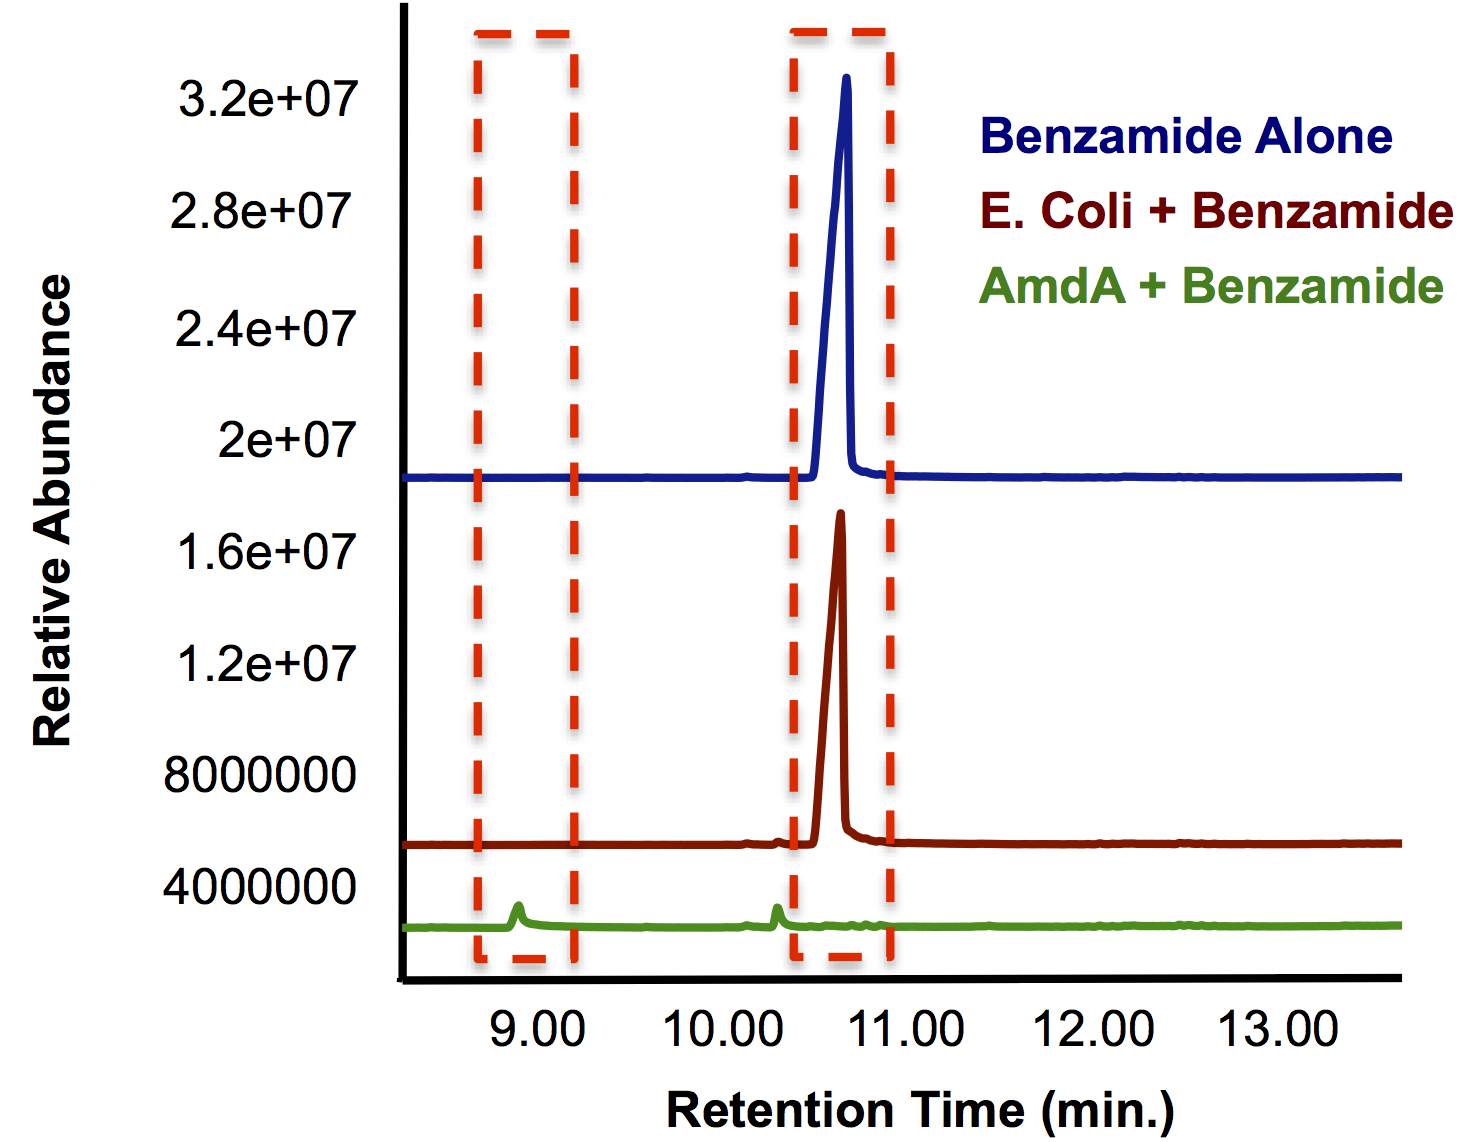 Figure 7: GC chromatograph demonstrating the degradation of benzamide by AmdA compared to an E. coli control.  Additionally, a smaller peak with an earlier retention time is produced solely in the sample run.